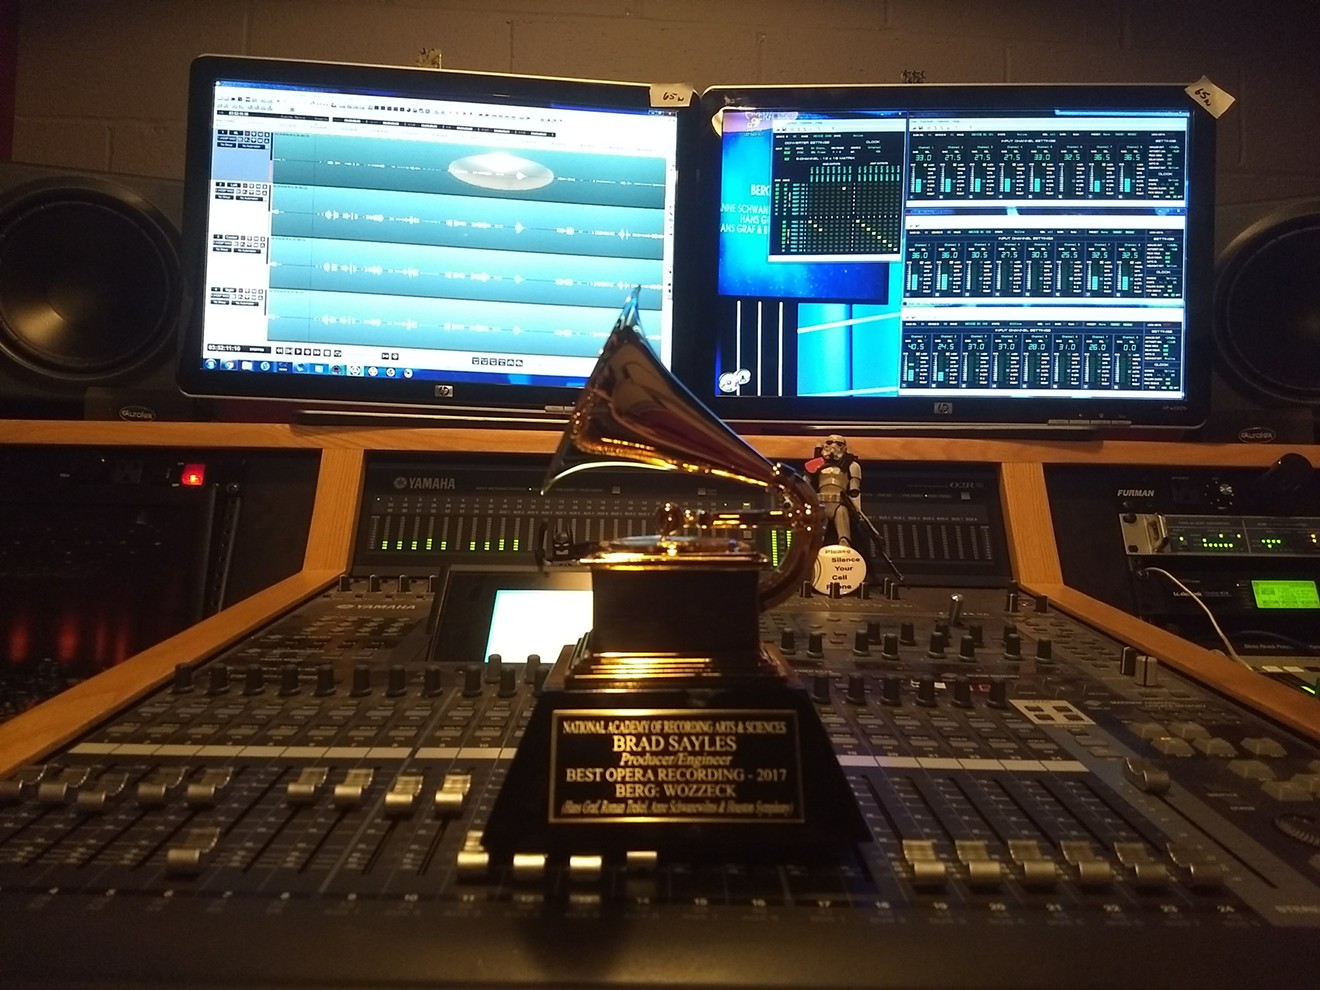 Which do you think gets more attention? The Grammy Award or the Star Wars figurine?